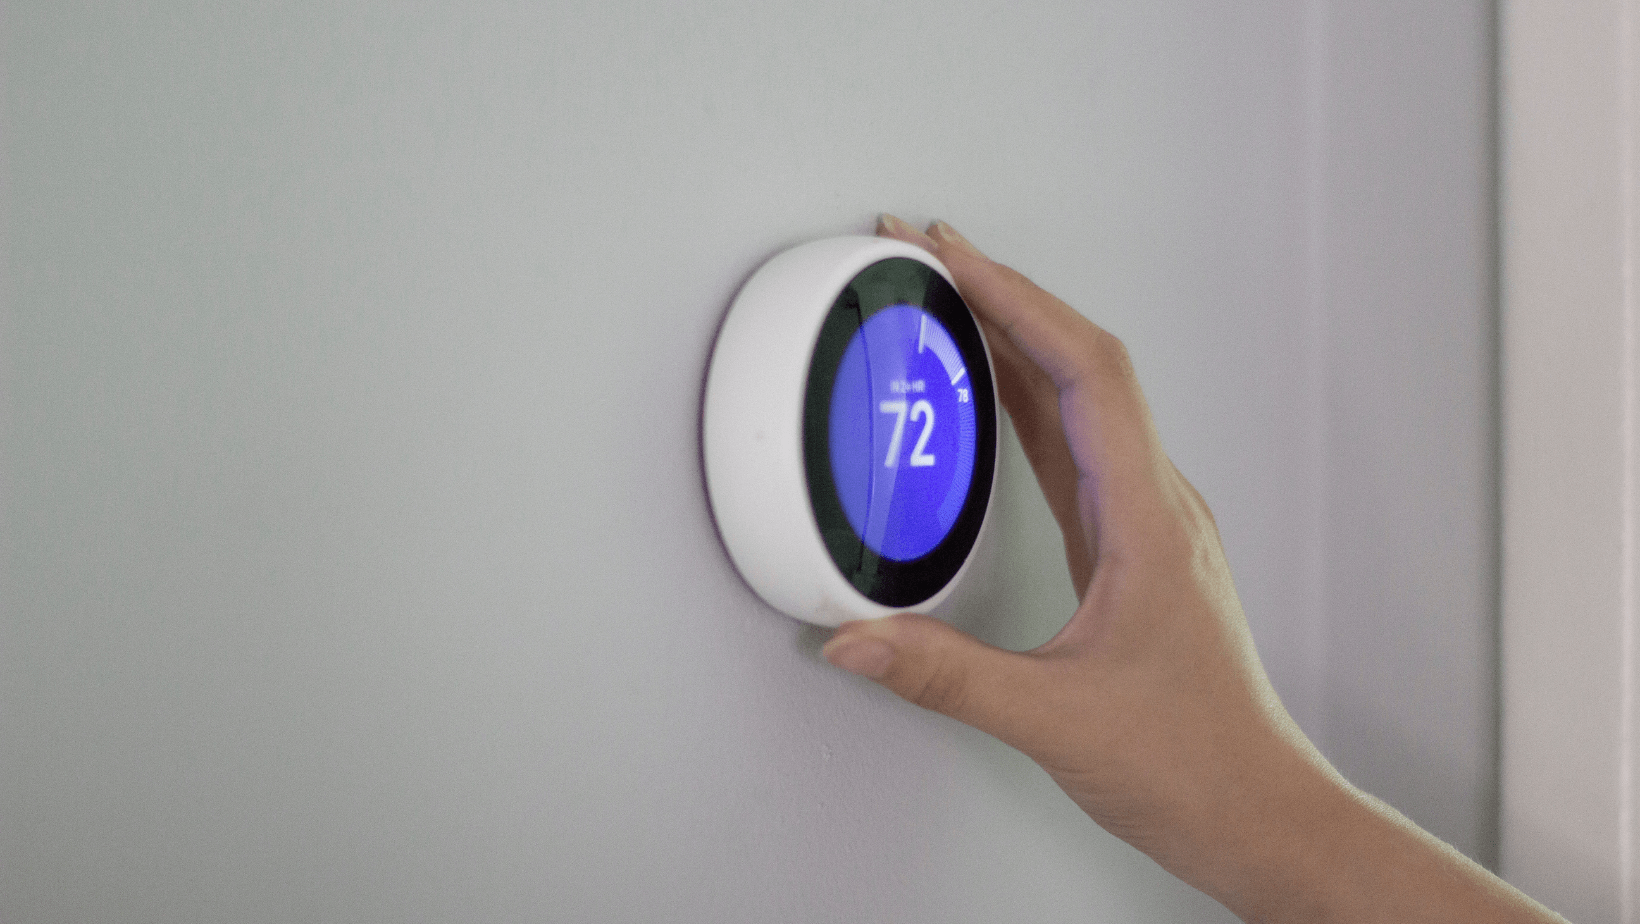 Smart thermostats